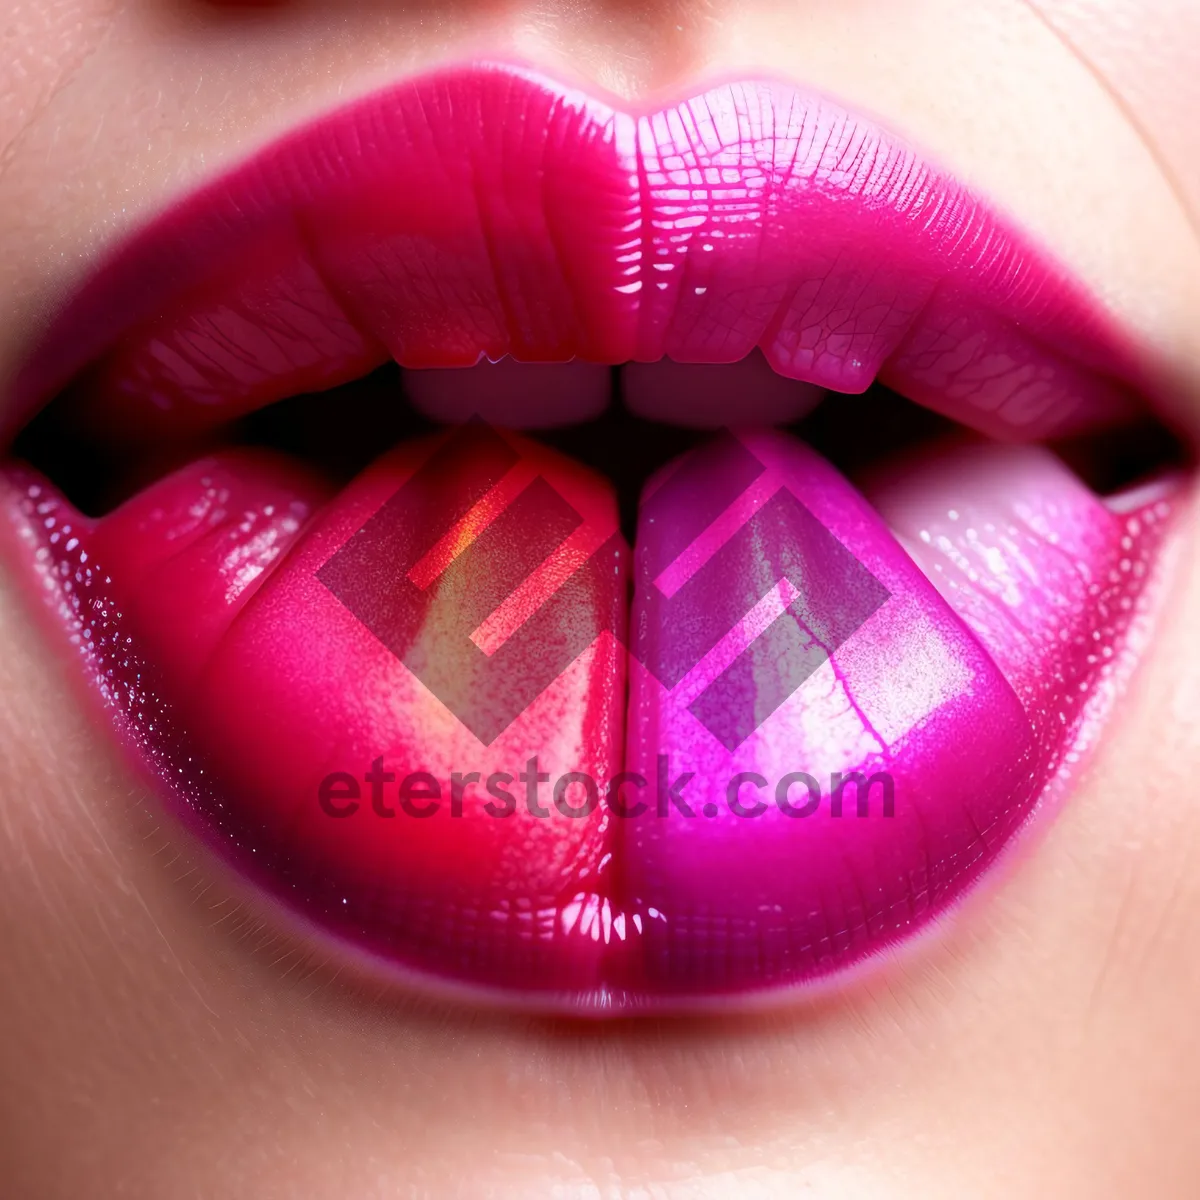 Picture of Romantic Rose Petals and Pink Lipstick